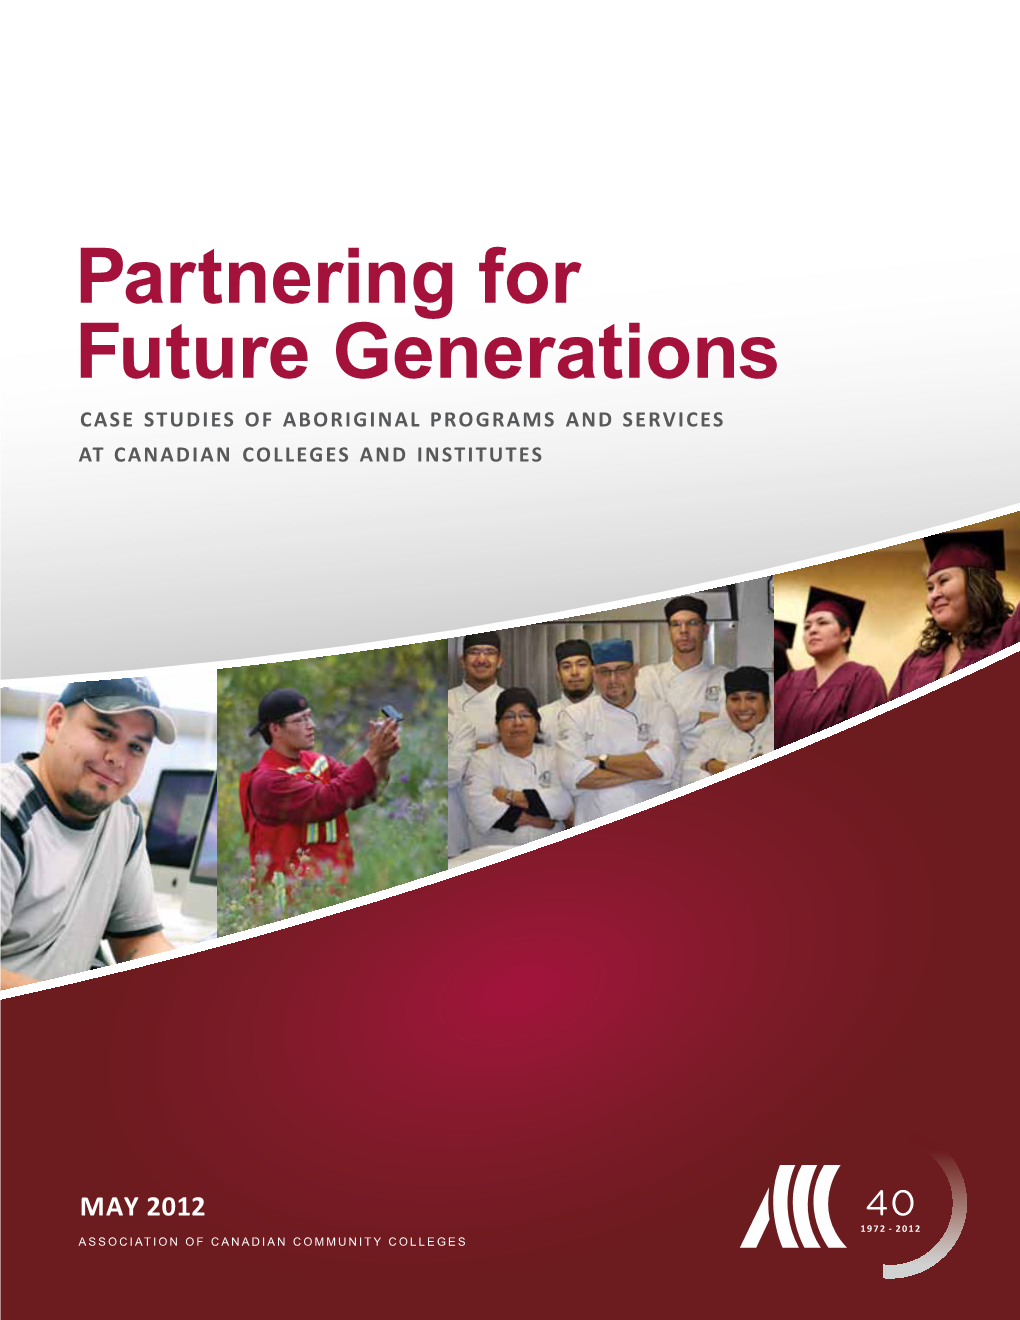 Partnering for Future Generations